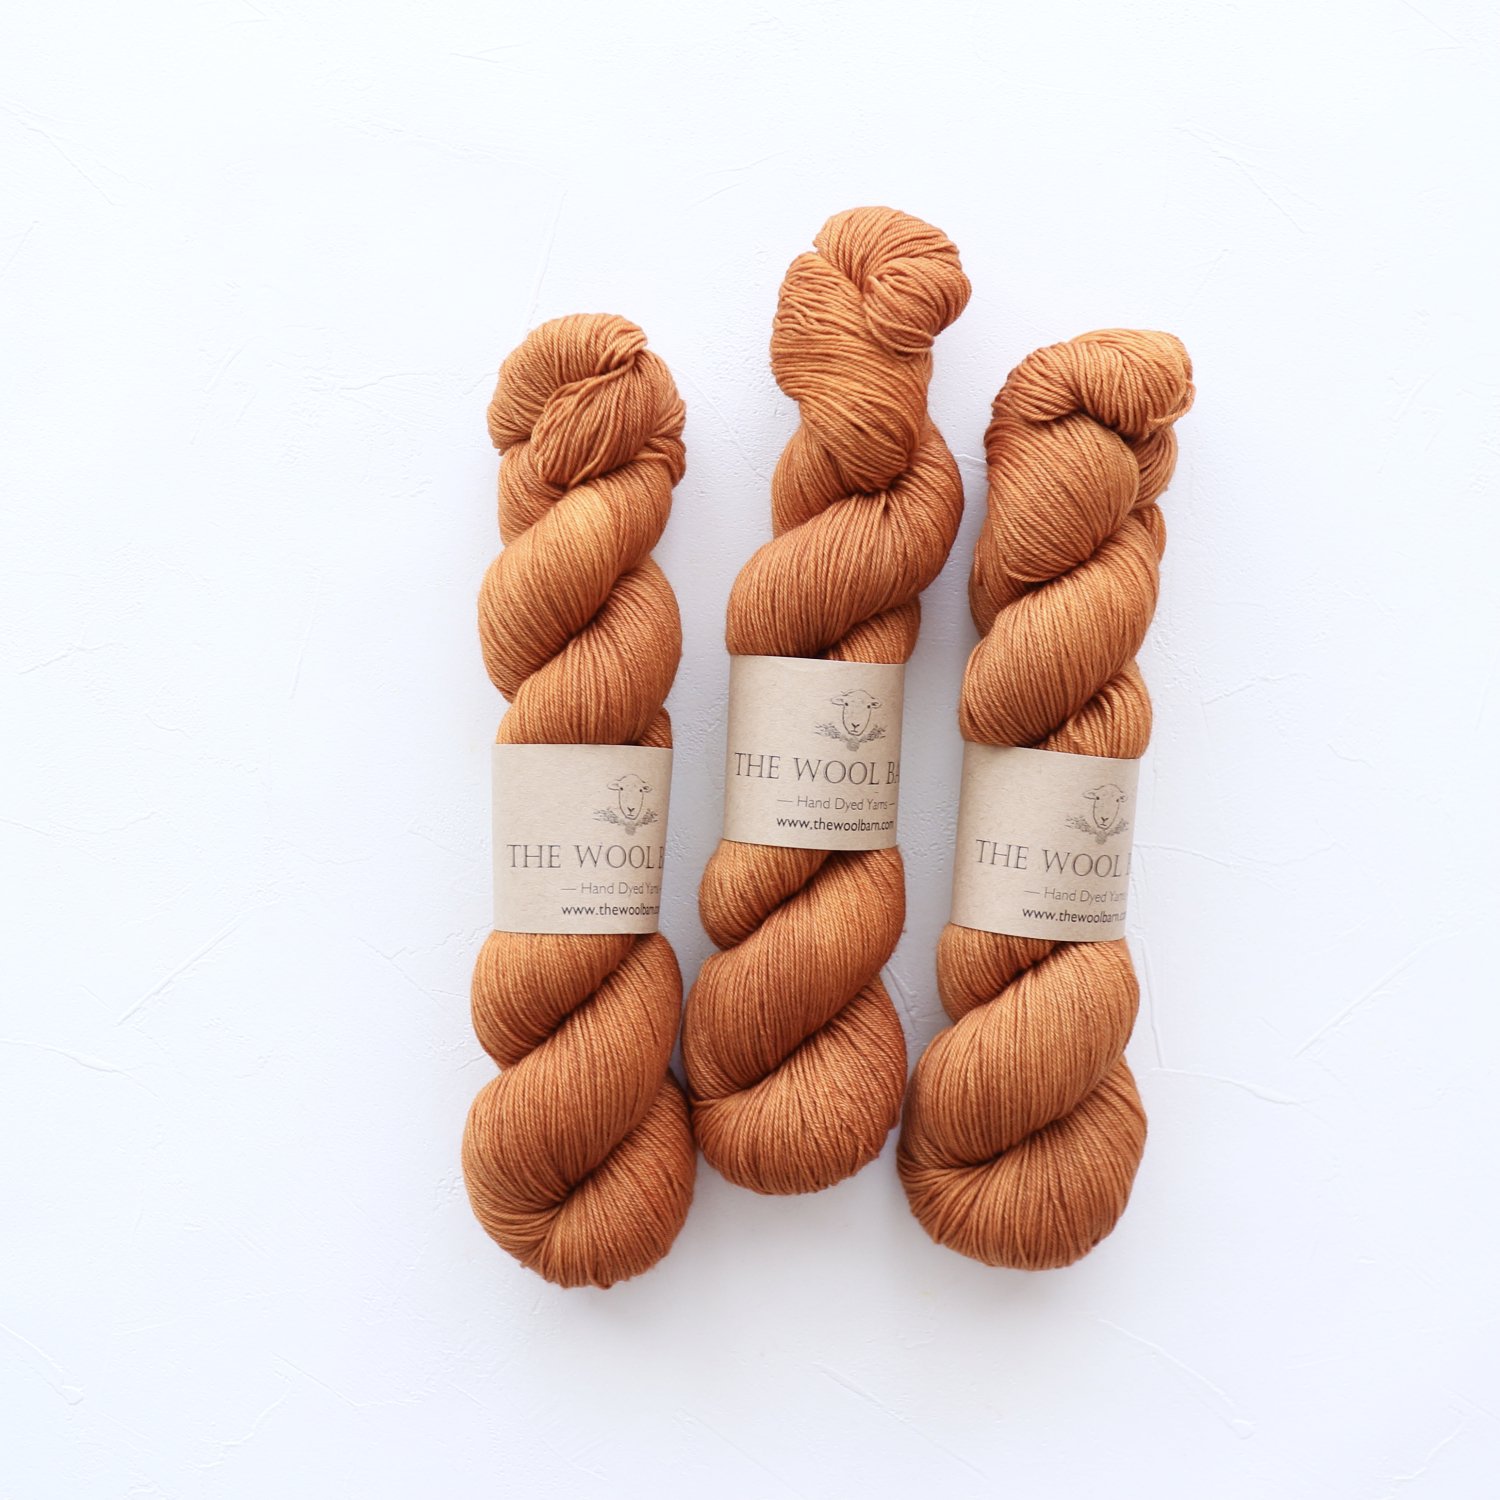 【TheWoolBarn】<br>Smooth Sock 4ply<br>Autumn Leaves